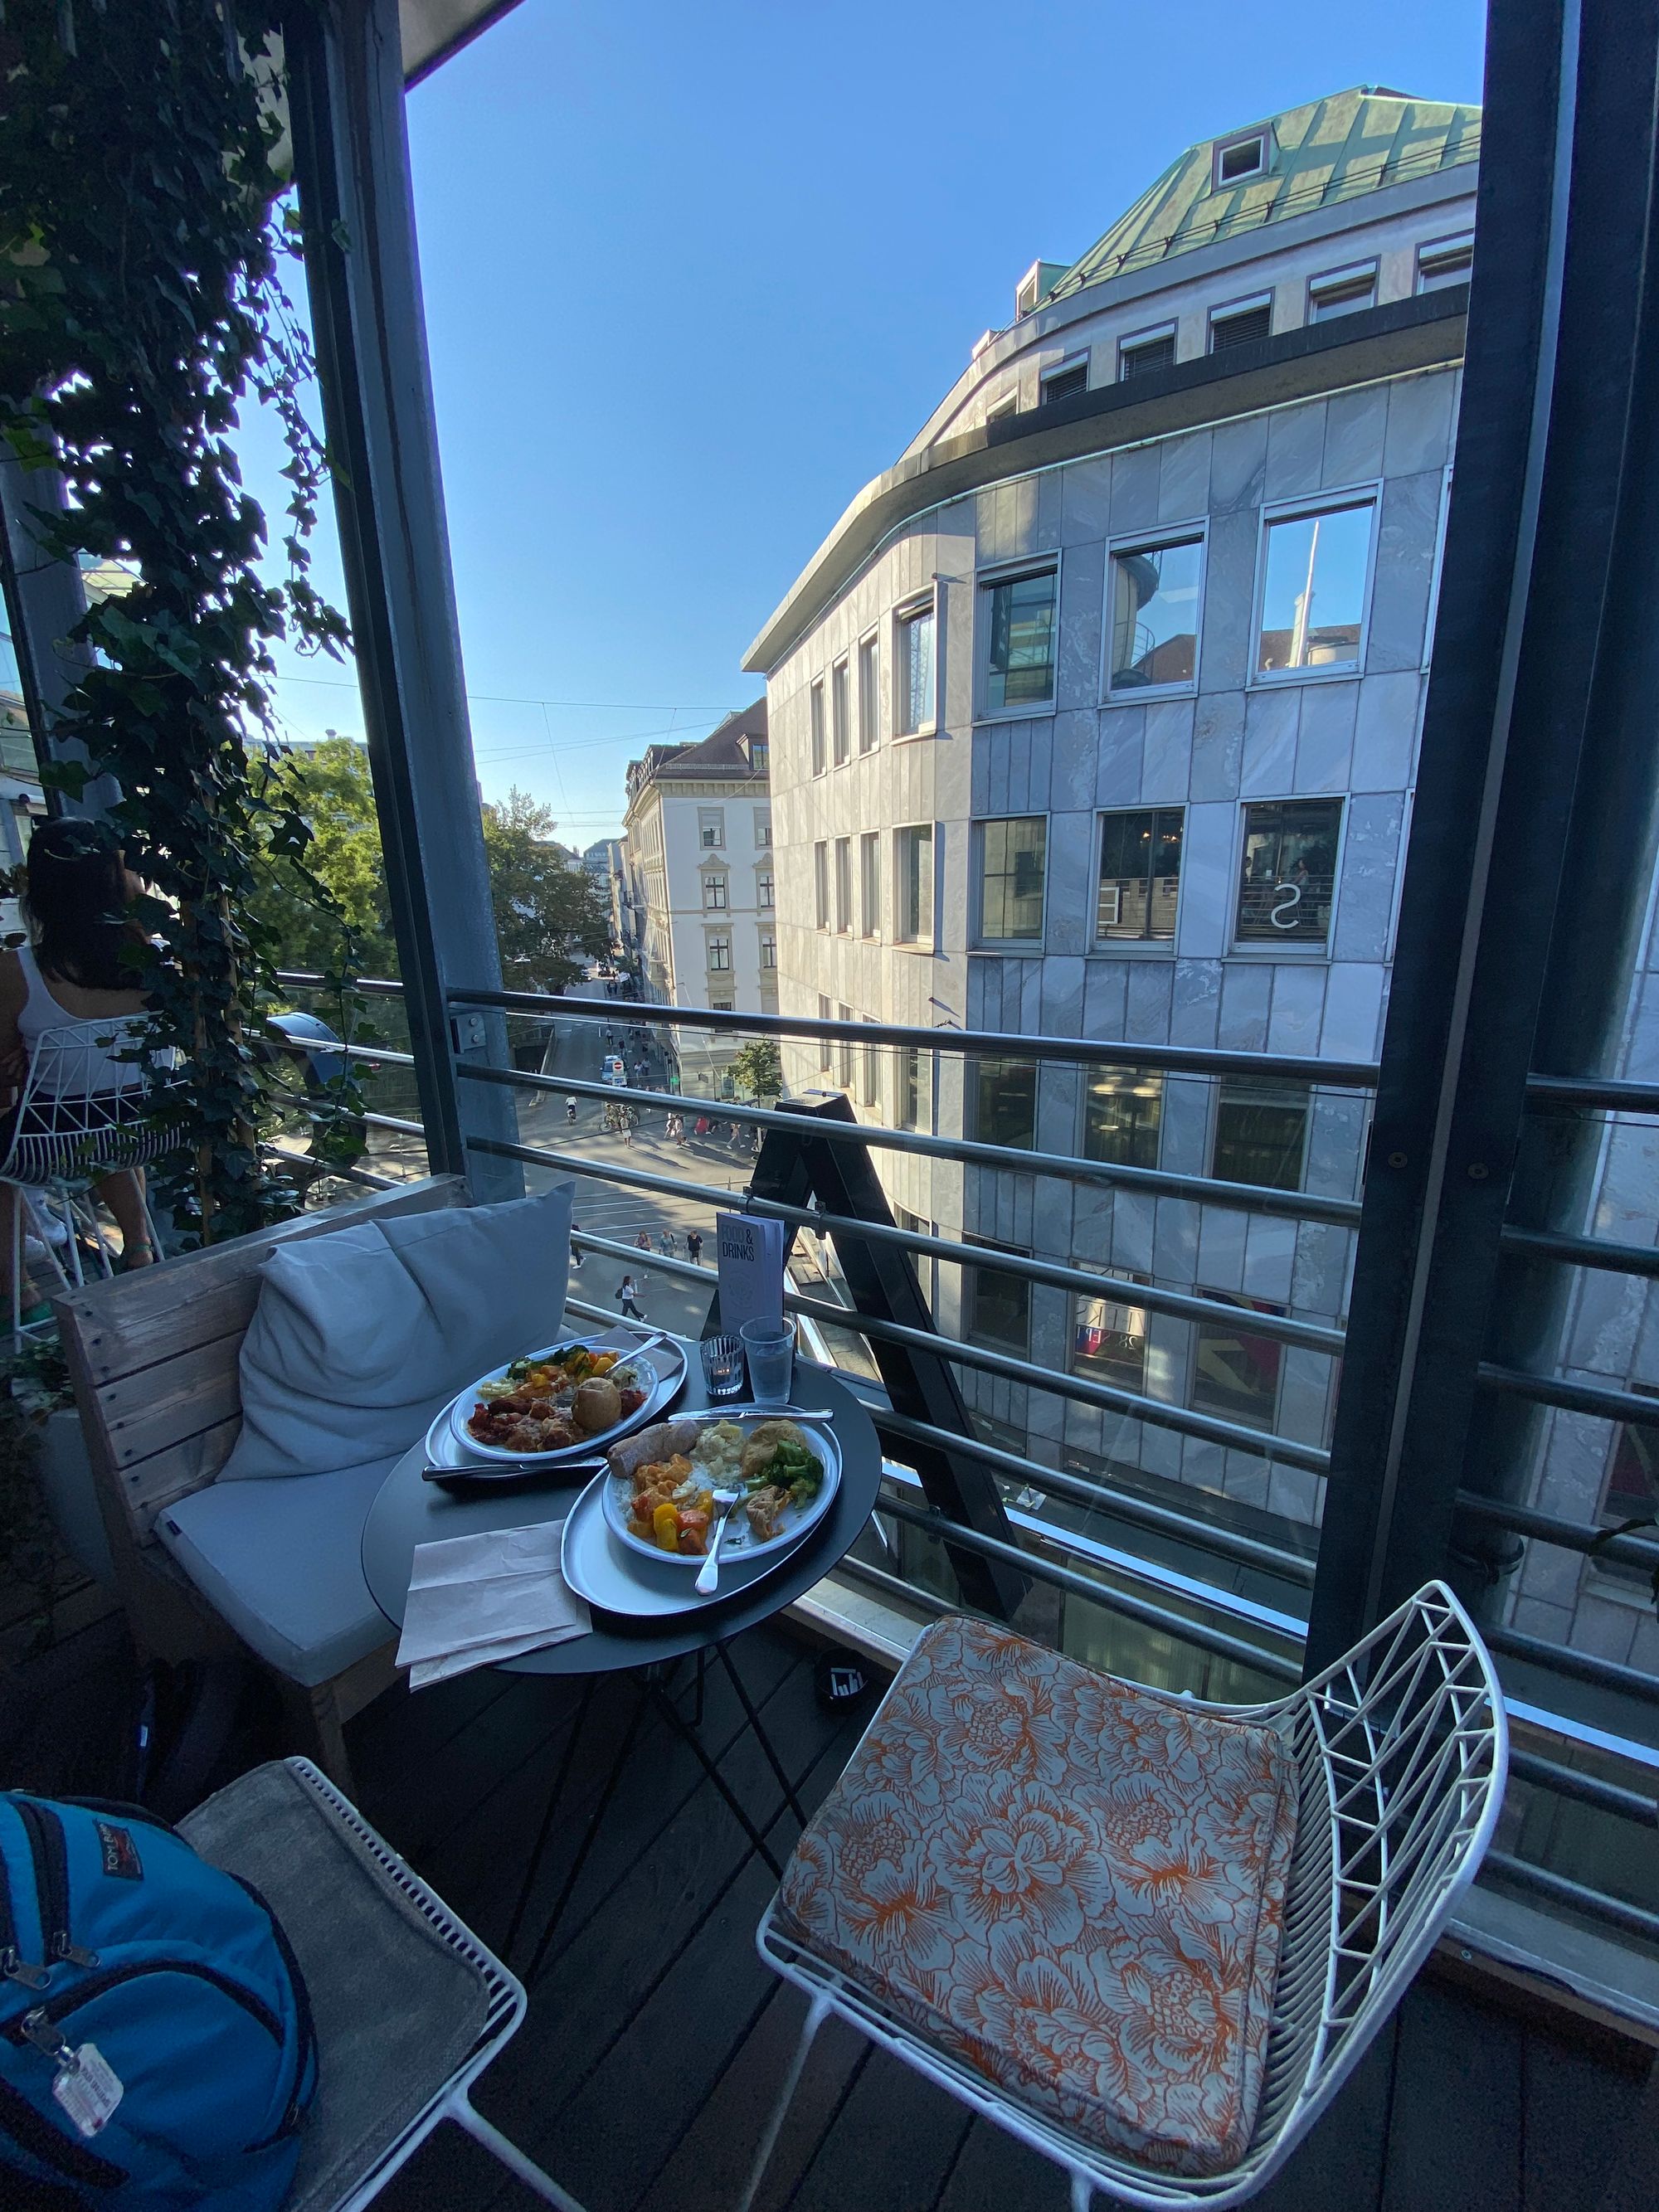 Two plates of food on a table with two empty chairs on a balcony overlooking a city street.